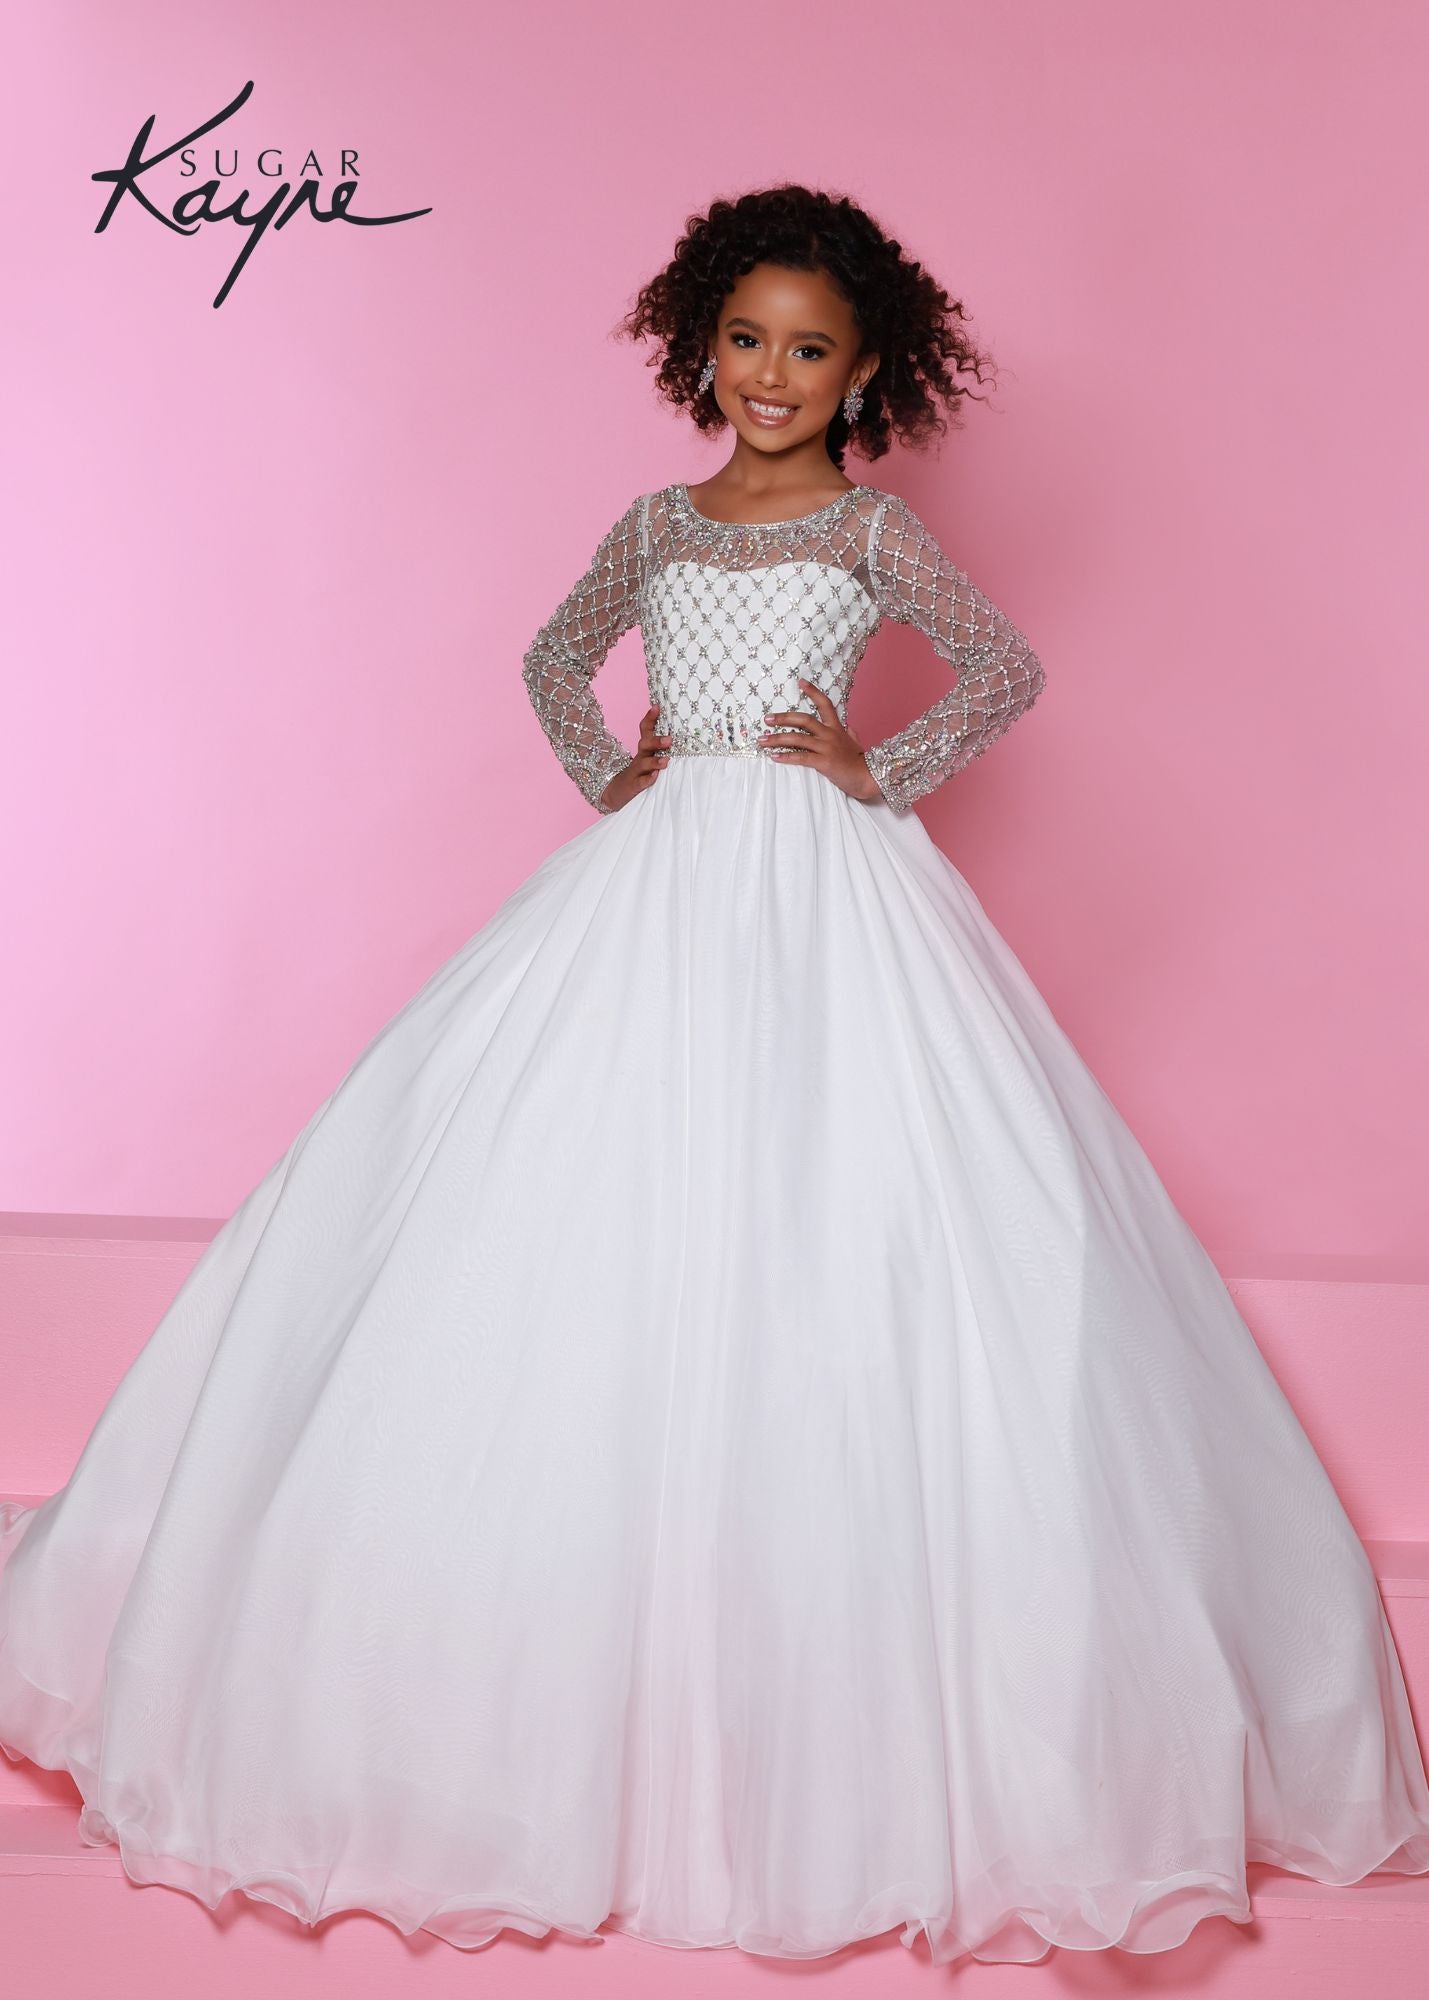 Sugar Kayne C303 Long Sleeve Sheer Crystal Chiffon Girls Pageant Dress Ball Gown Dress Product Details Be the princess you were born to be! This chiffon ballgown spotlights the luxurious hand-beaded bodice with long-sleeves to make an exquisite entrance.  Colors: Baby Blue, Petal Pink, White  Sizes: 2, 4, 6, 8, 10, 12, 14, 16  Fabric Chiffon, Mesh, Satin Lining